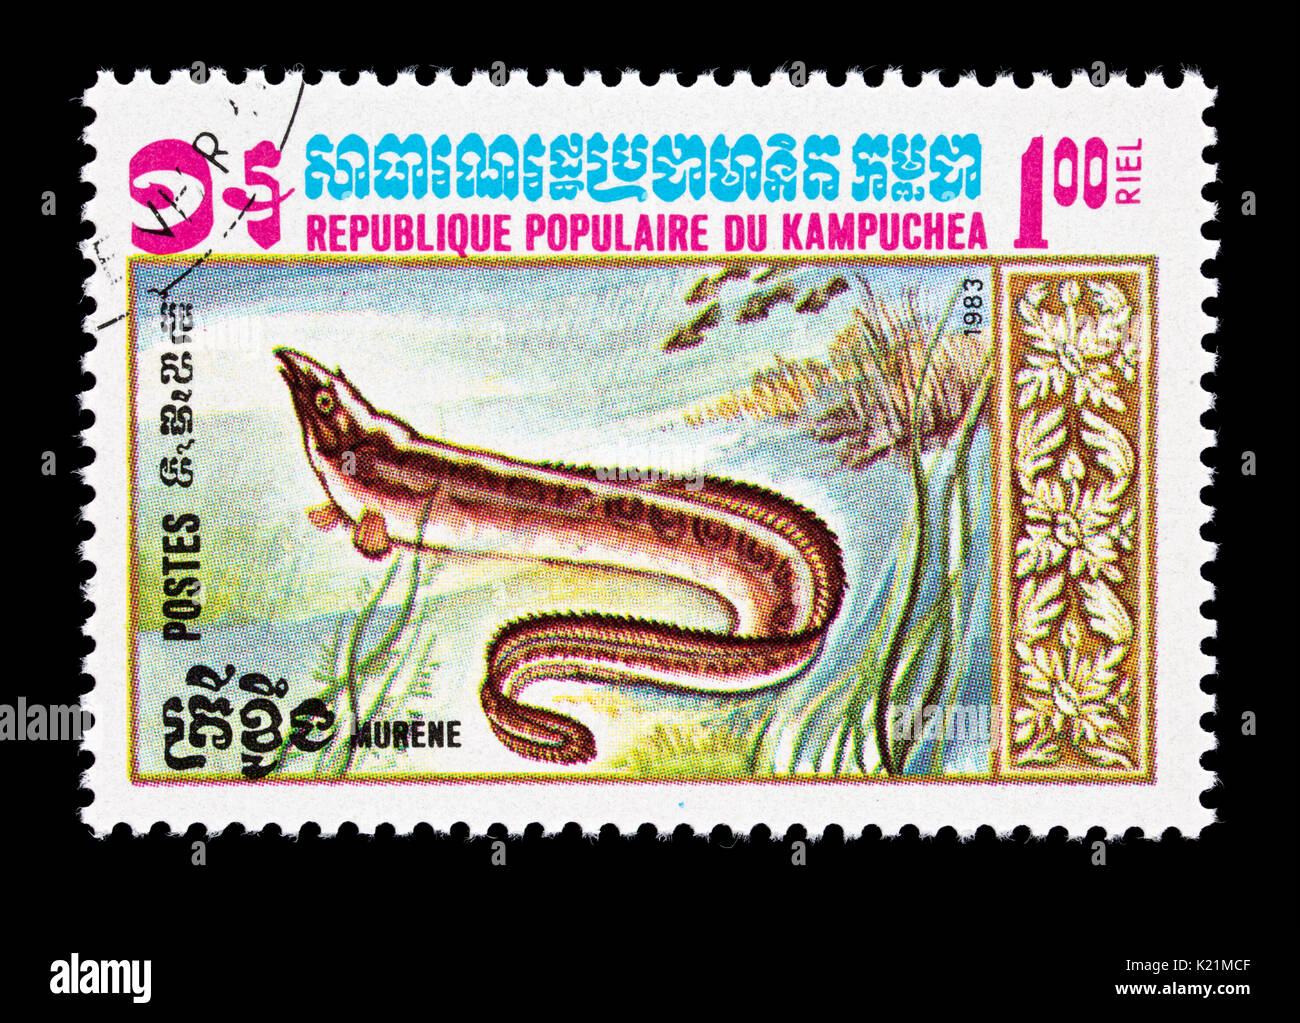 Postage stamp from Cambodia (Kampuchea) depicting a moray eel species. Stock Photo